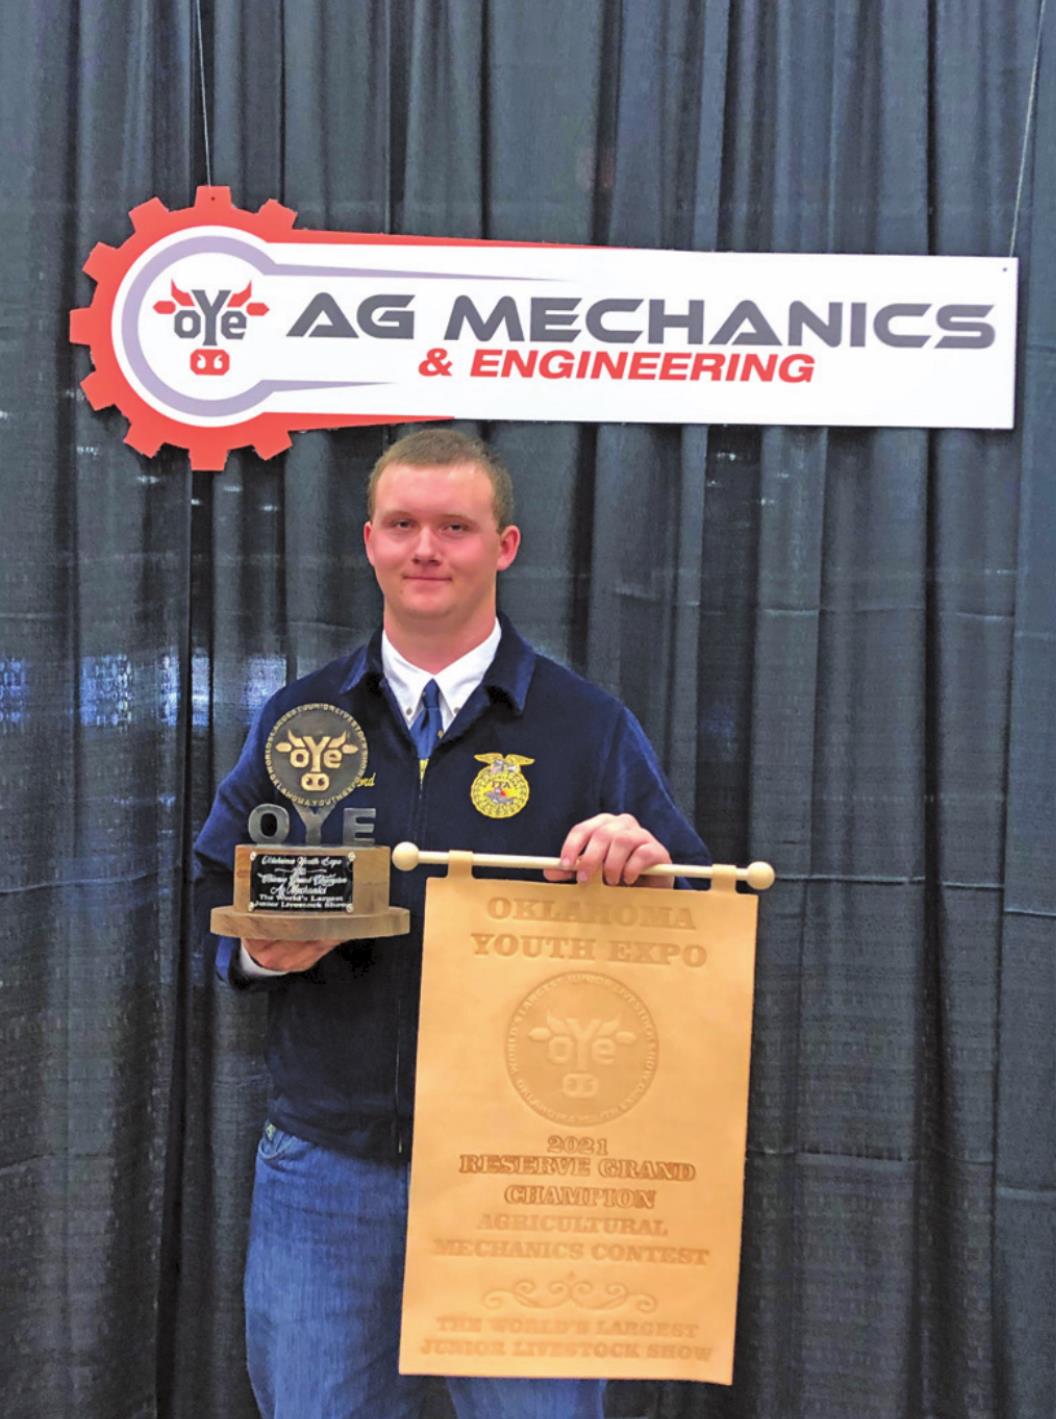 Oklahoma Youth Expo Ag Mechanics Contest held March 10, 2021 at the